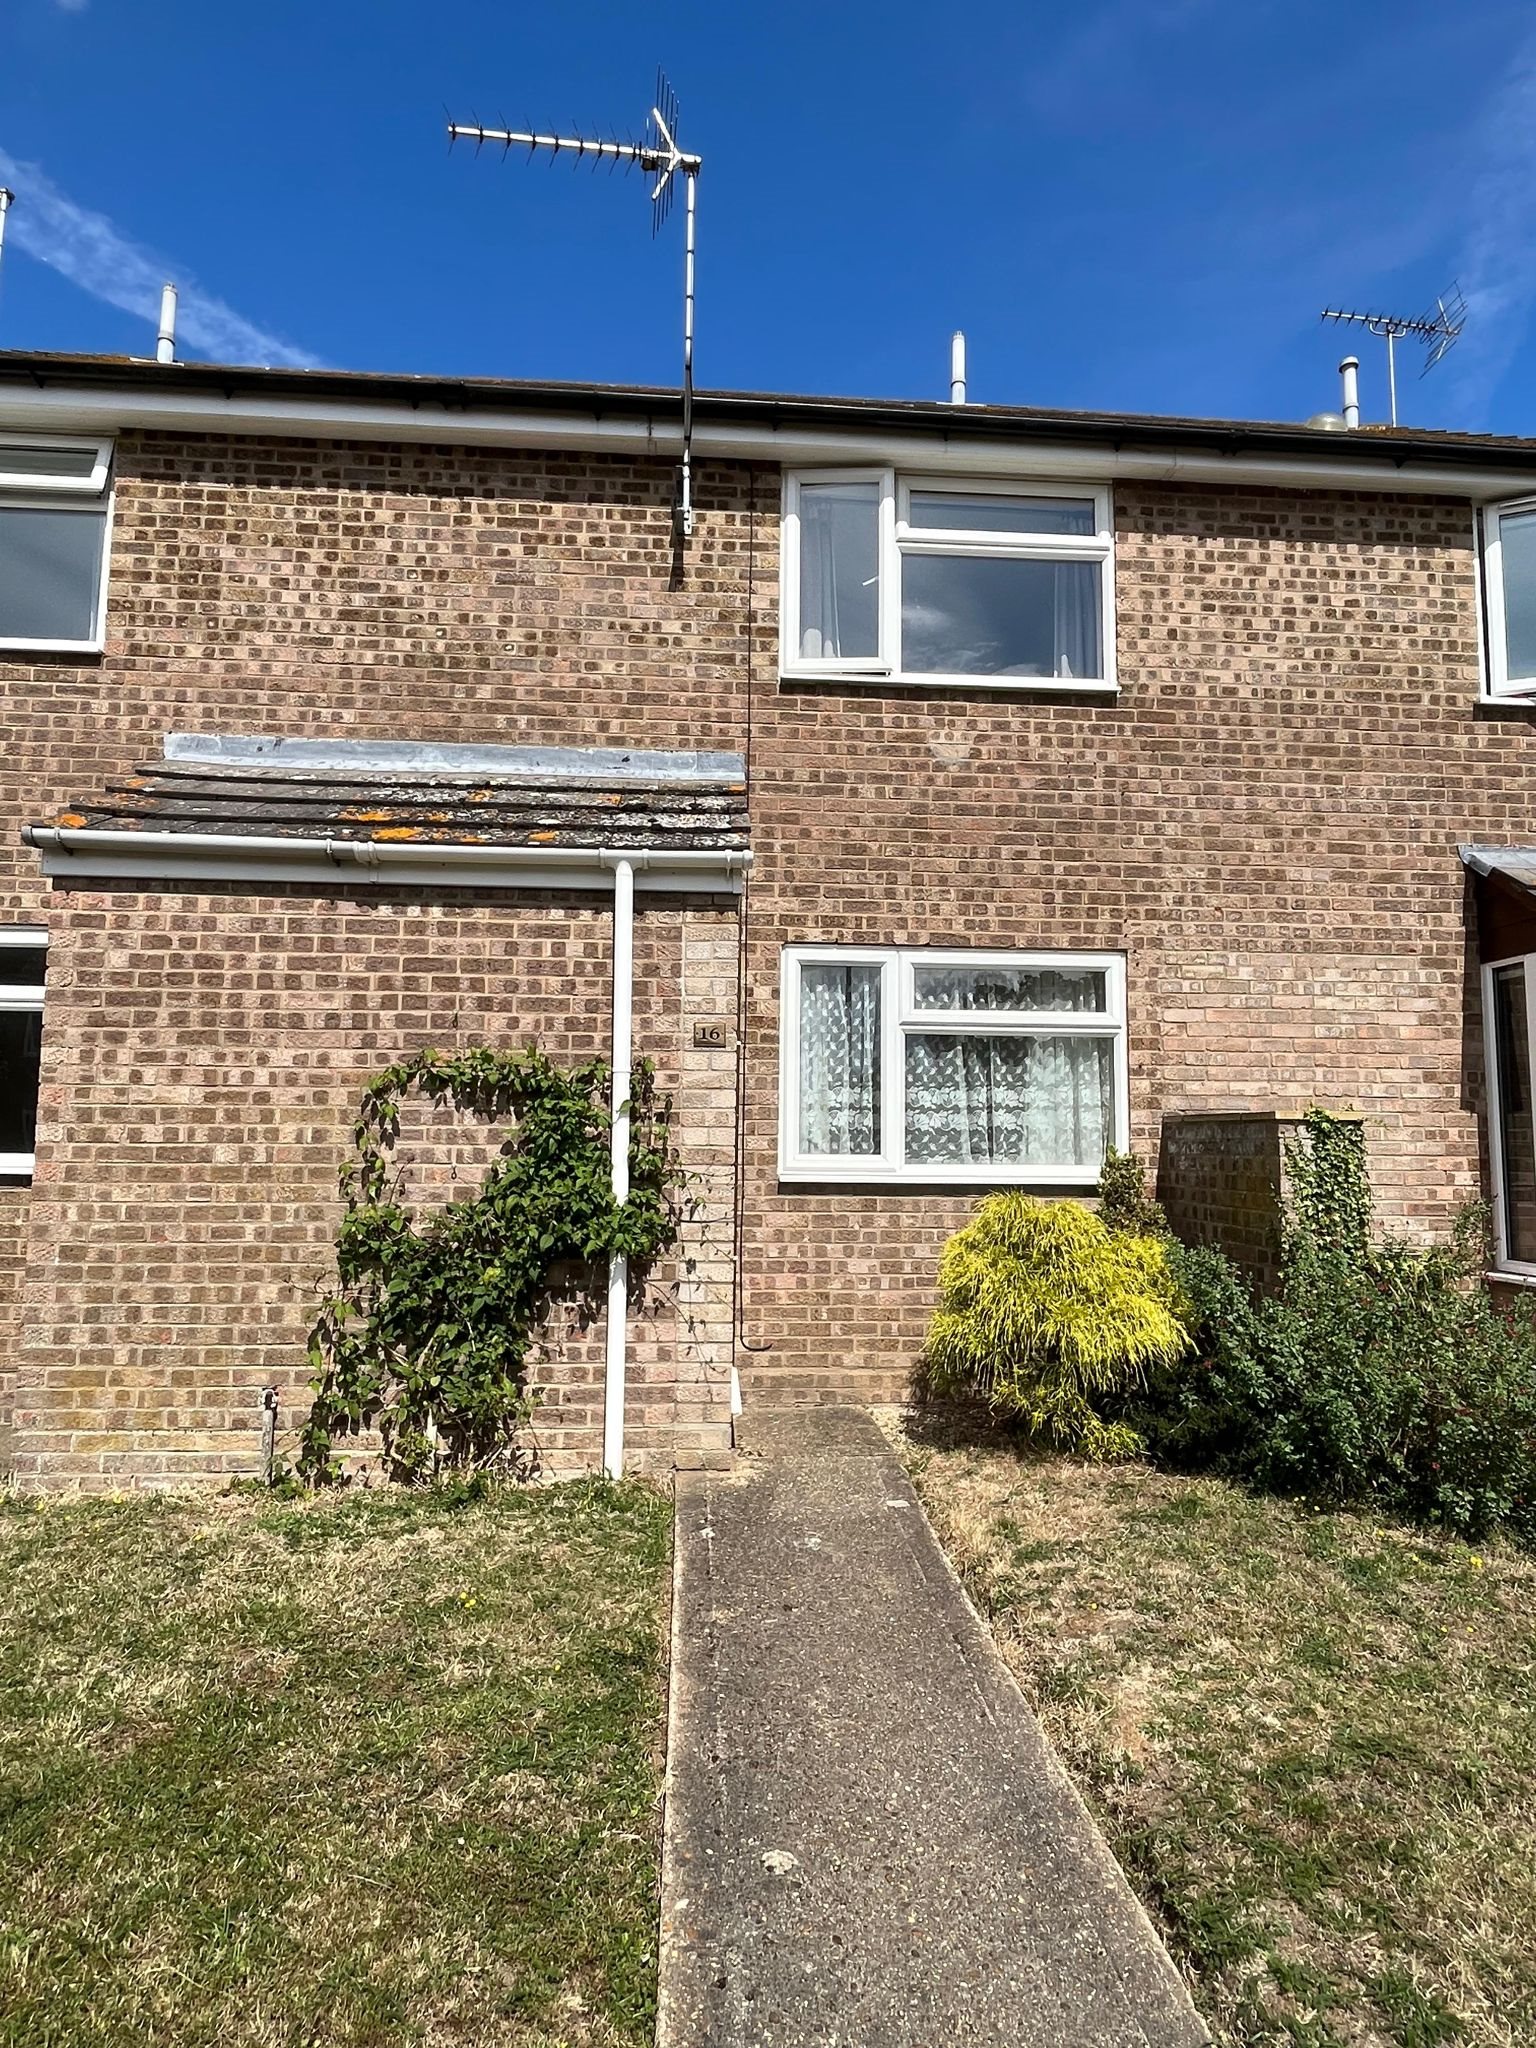 2 bed house to rent in Henrietta Close, Wivenhoe, CO7 